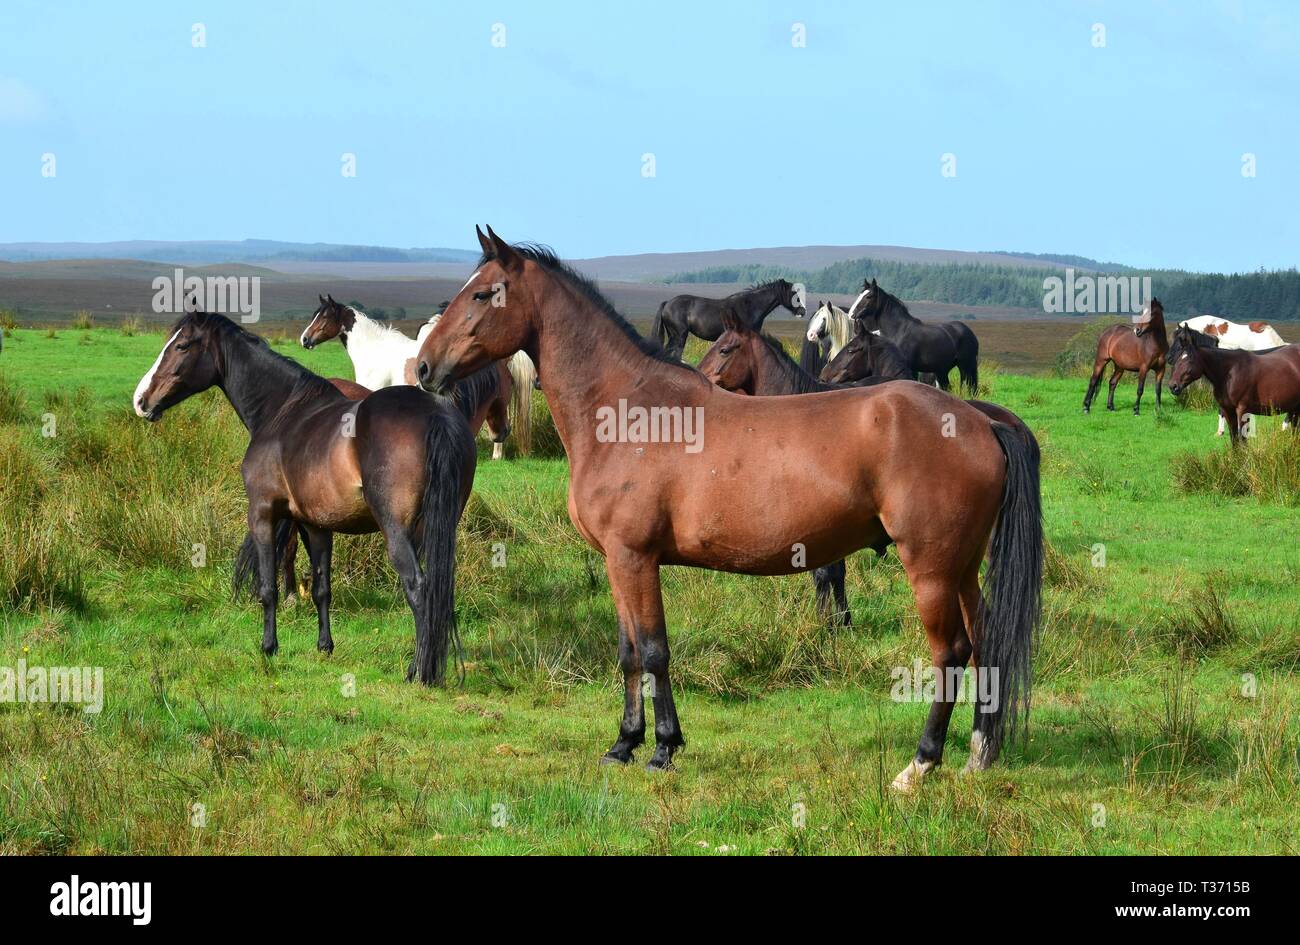 A herd of horses in Ireland. One bay horse standing in front. Most of the horses look attentively in the same direction. Stock Photo